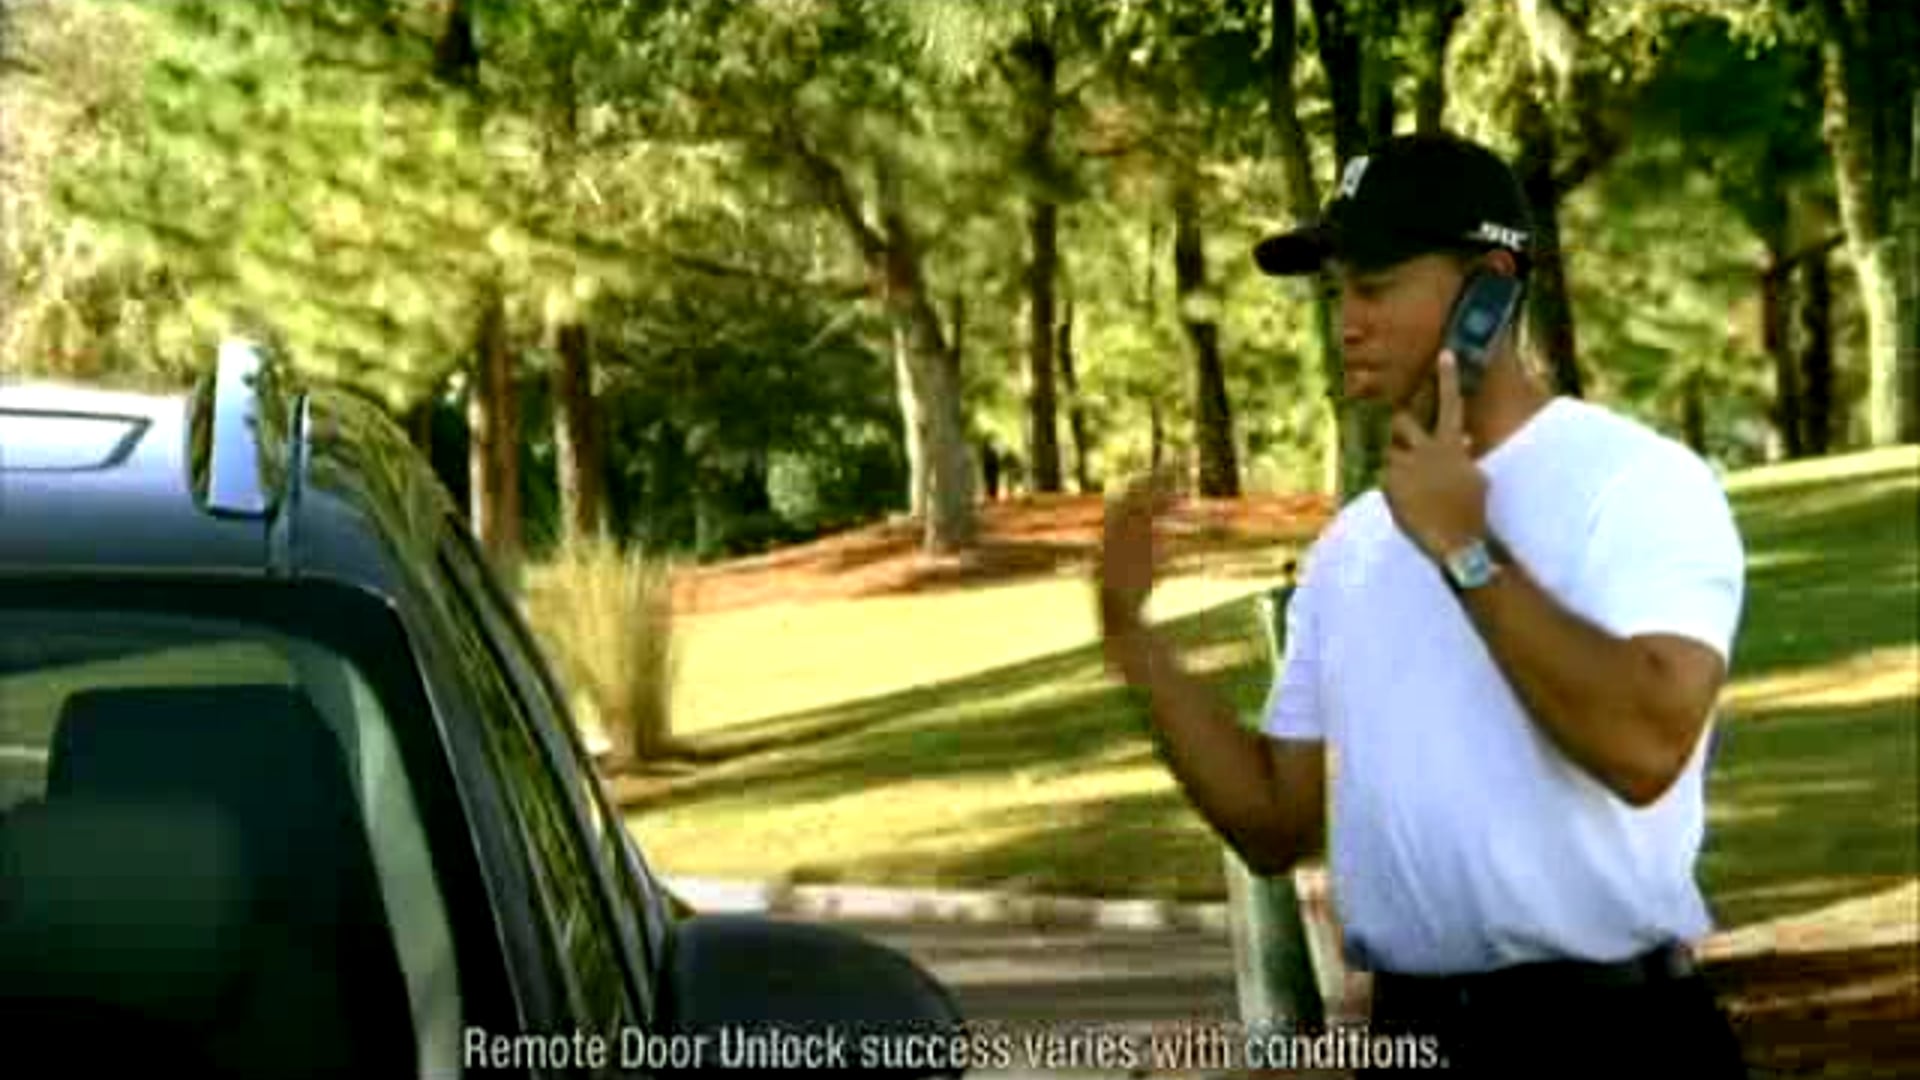 On Star with Tiger Woods